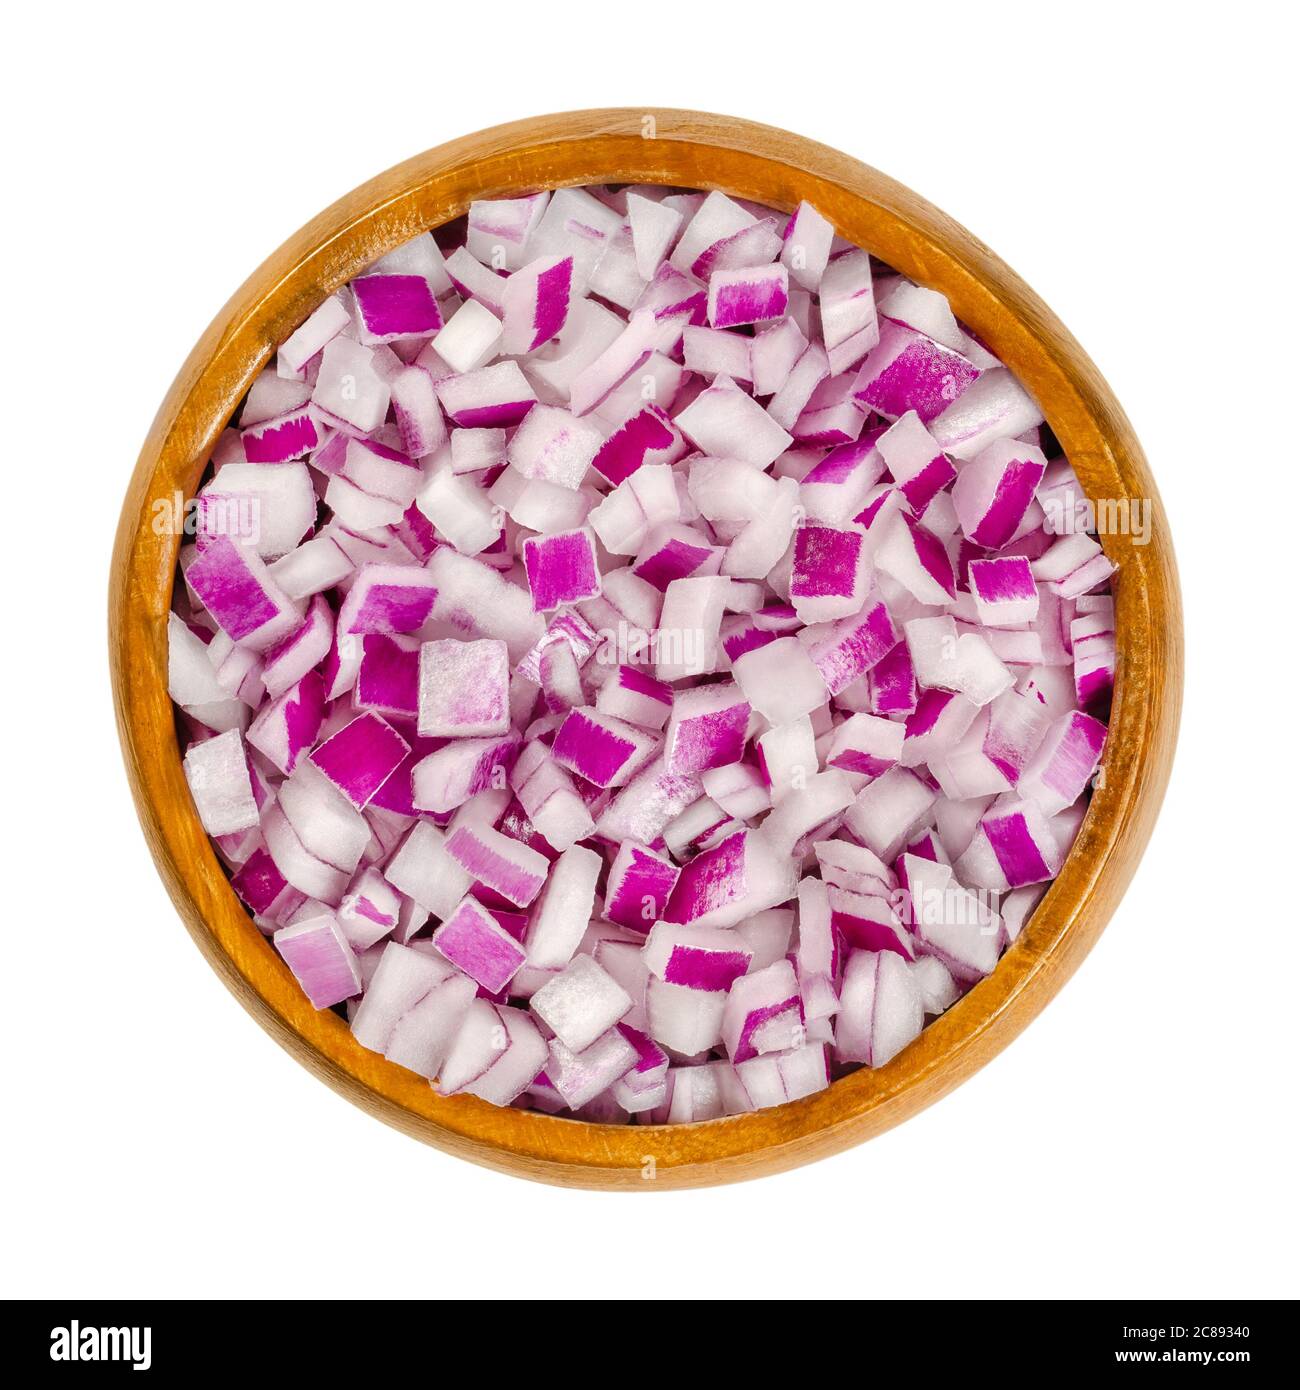 Diced red onions in wooden bowl. Cut cubes of onion cultivar Allium cepa, with purplish red skin and white flesh tinged with red. Closeup, from above. Stock Photo